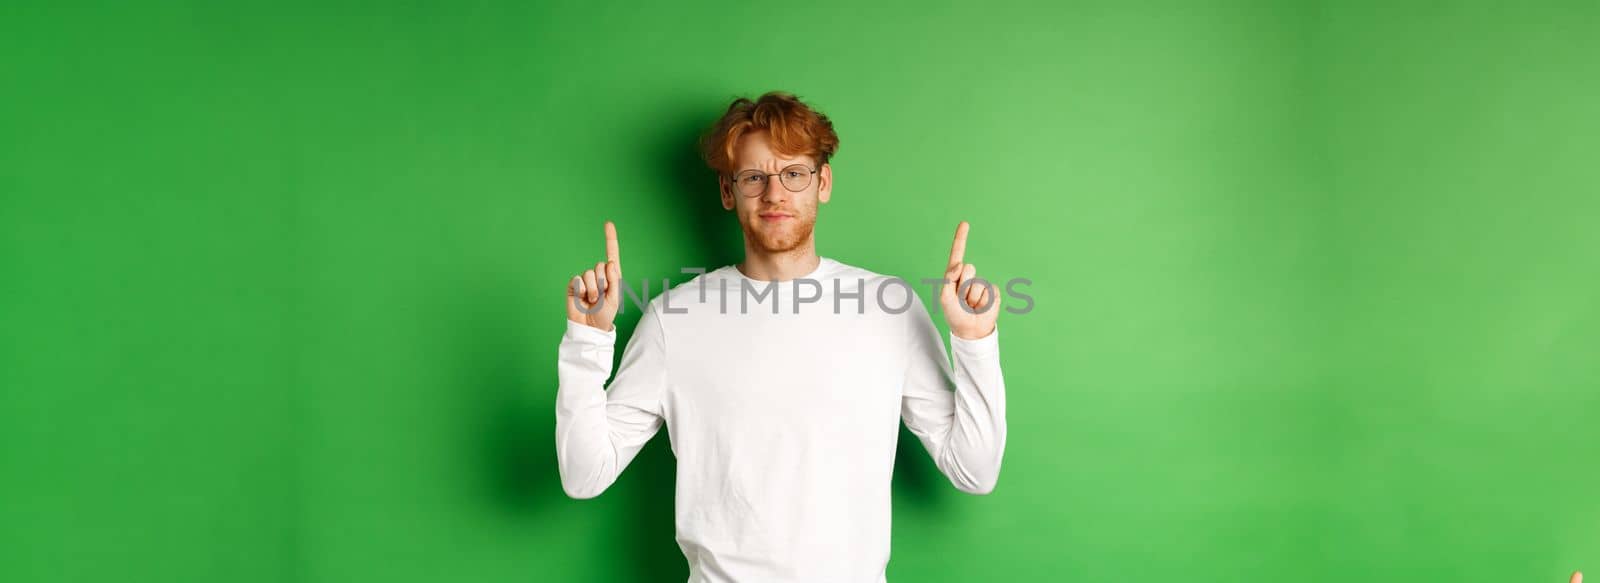 Displeased young man with red hair and glasses, pointing fingers up and frowning doubtful, feeling disappointed, standing over green background.